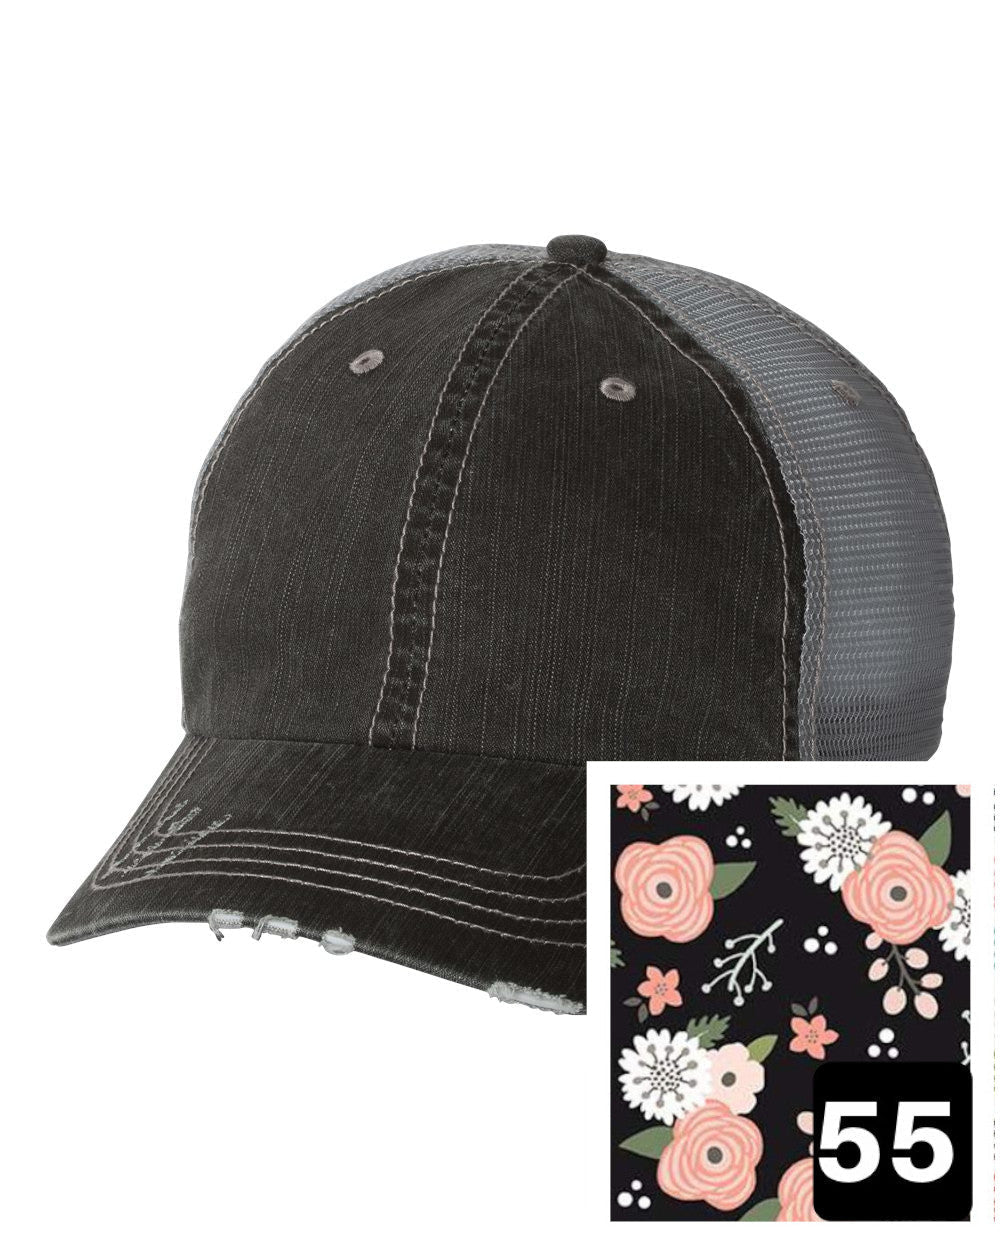 gray distressed trucker hat with petite floral on navy fabric state of Indiana